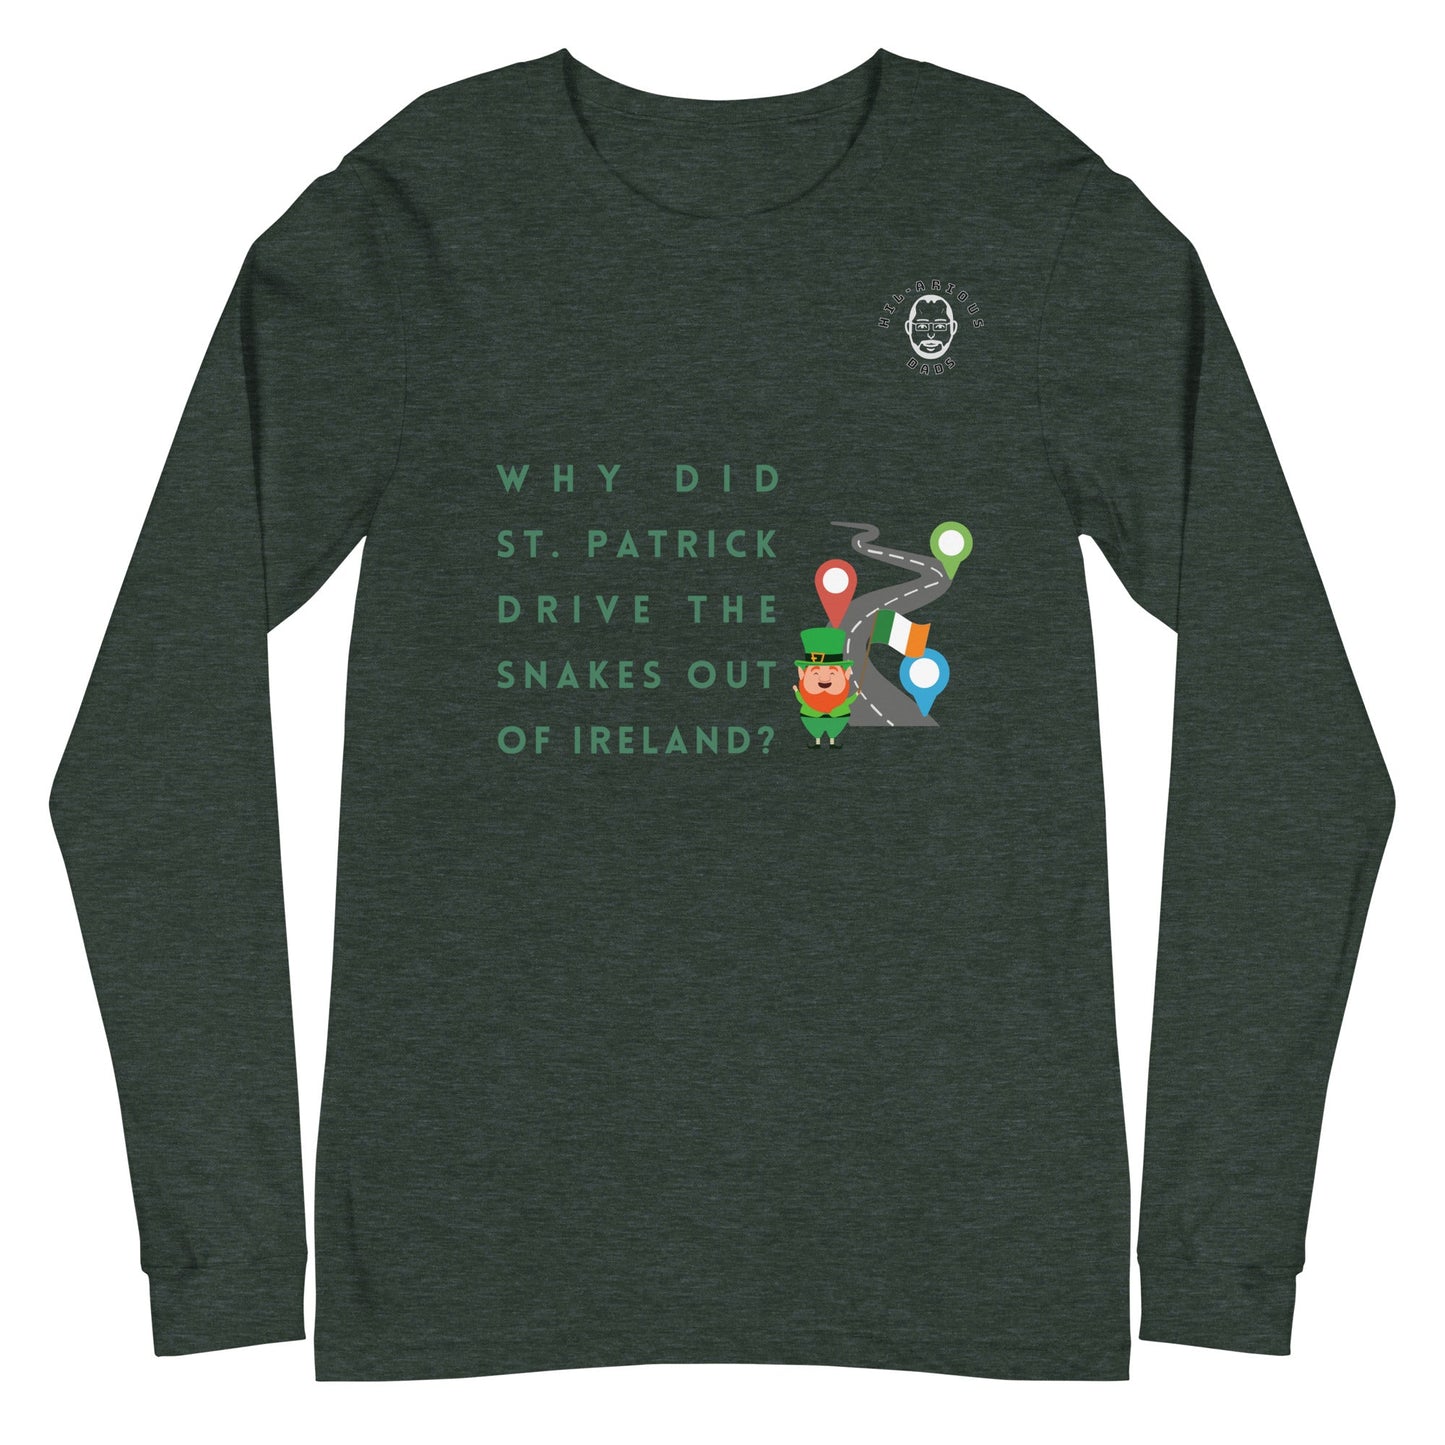 Why did St. Patrick drive the snakes out of Ireland?-Long Sleeve Tee - Hil-arious Dads